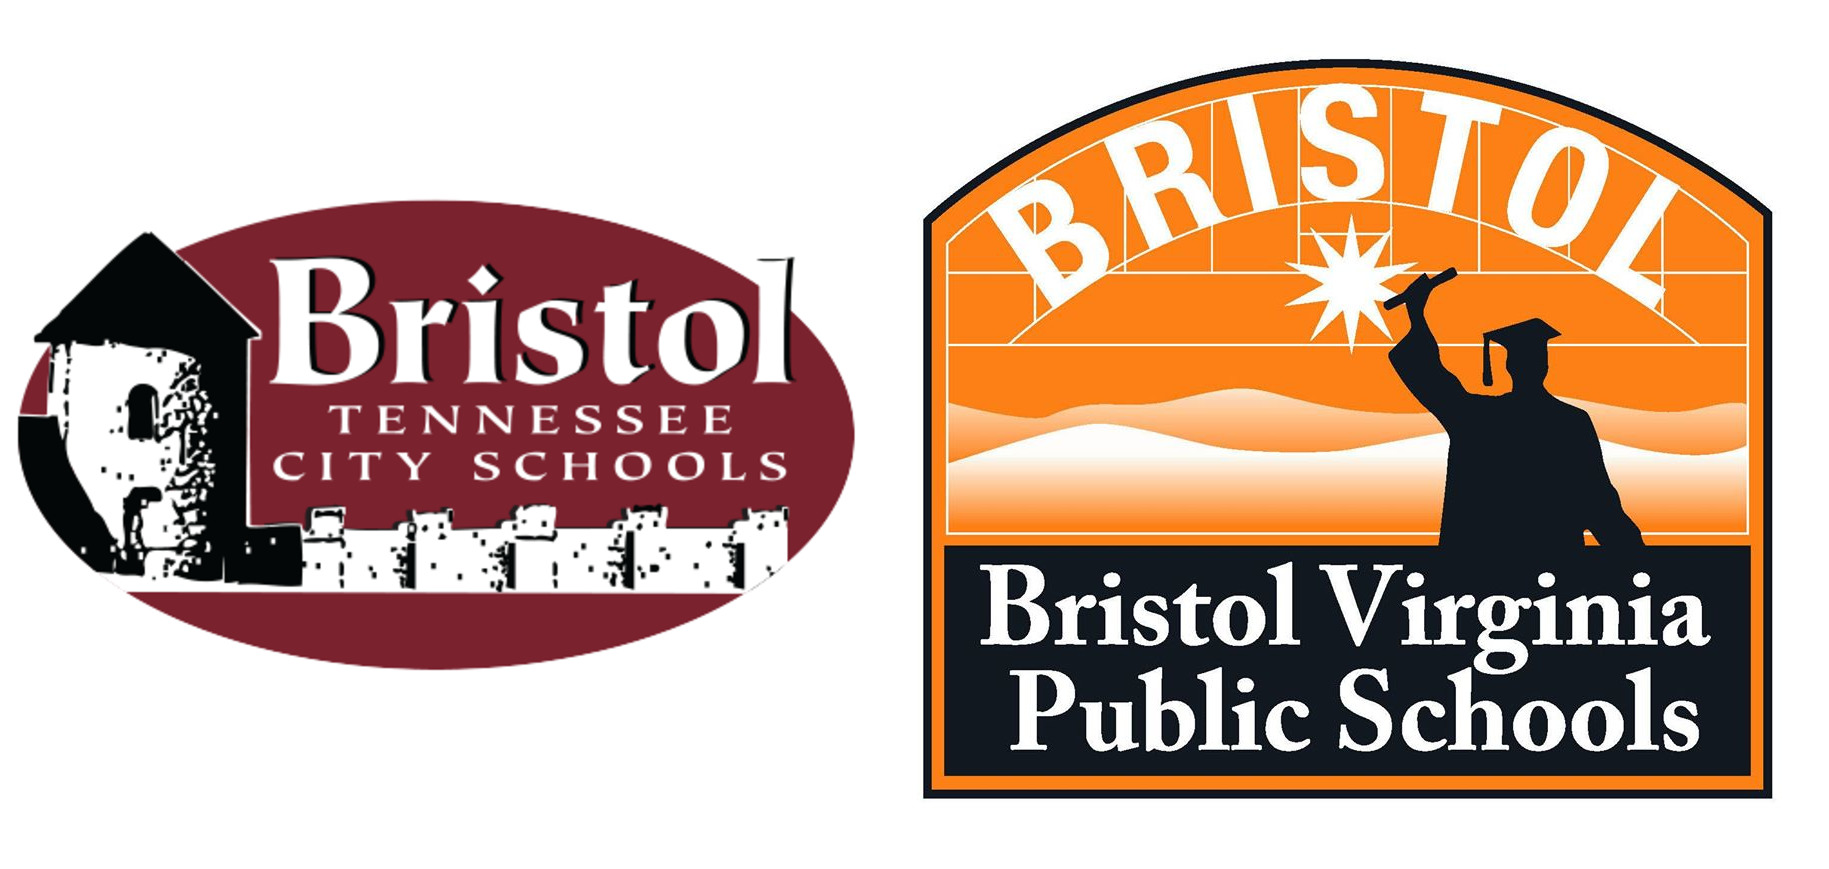 Increased Security to be at all Bristol, VA Public Schools and Bristol